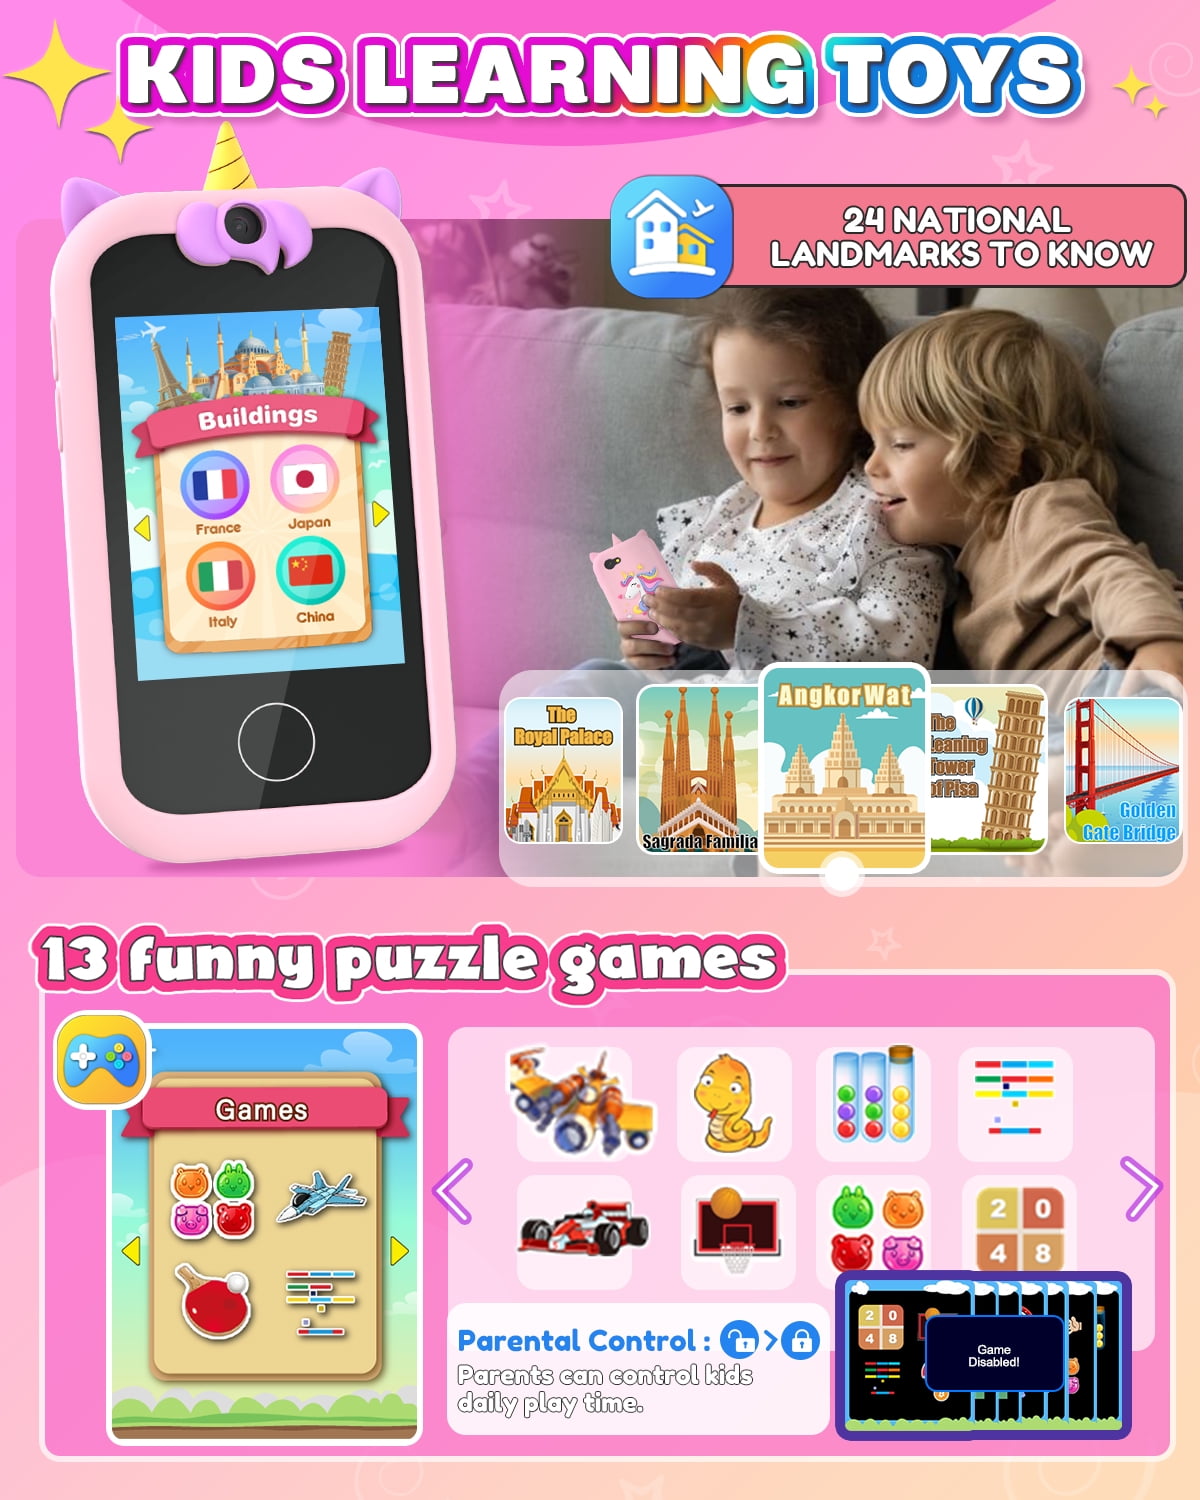 Kids Smart Phone for Girls Unicorn Gifts for Girls Age 6-8 Kids Phone with  Camera Games Music Torch Habit Alarm Stories Learning Girls Toys for 3 4 5  6 7 8 Year